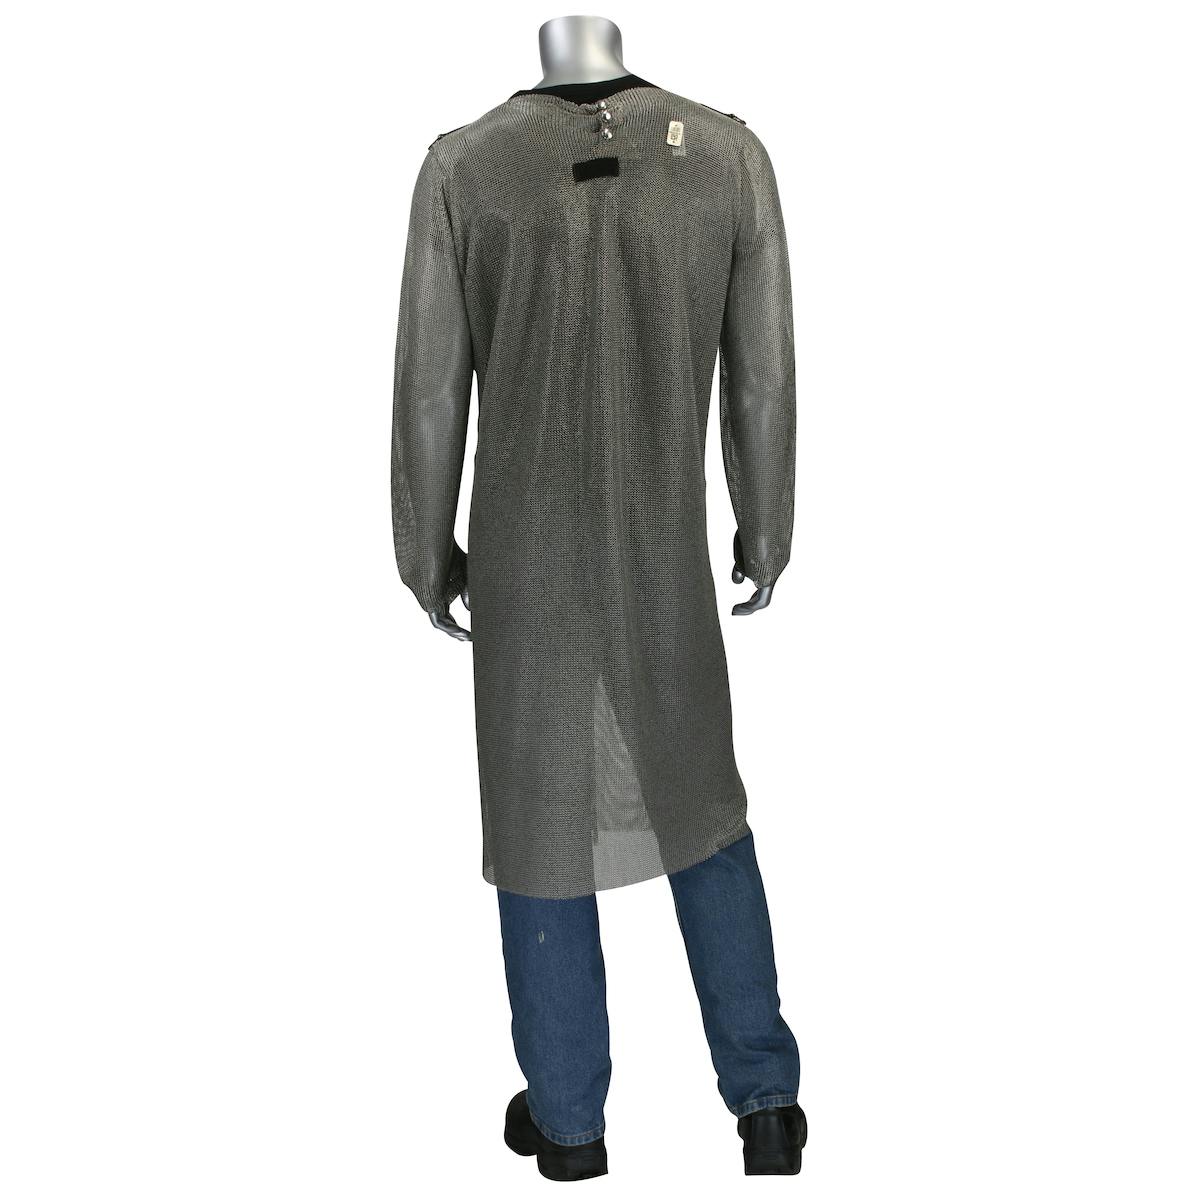 Stainless Steel Mesh Full Body Tunic with Sleeves, Silver (USM-4300L)